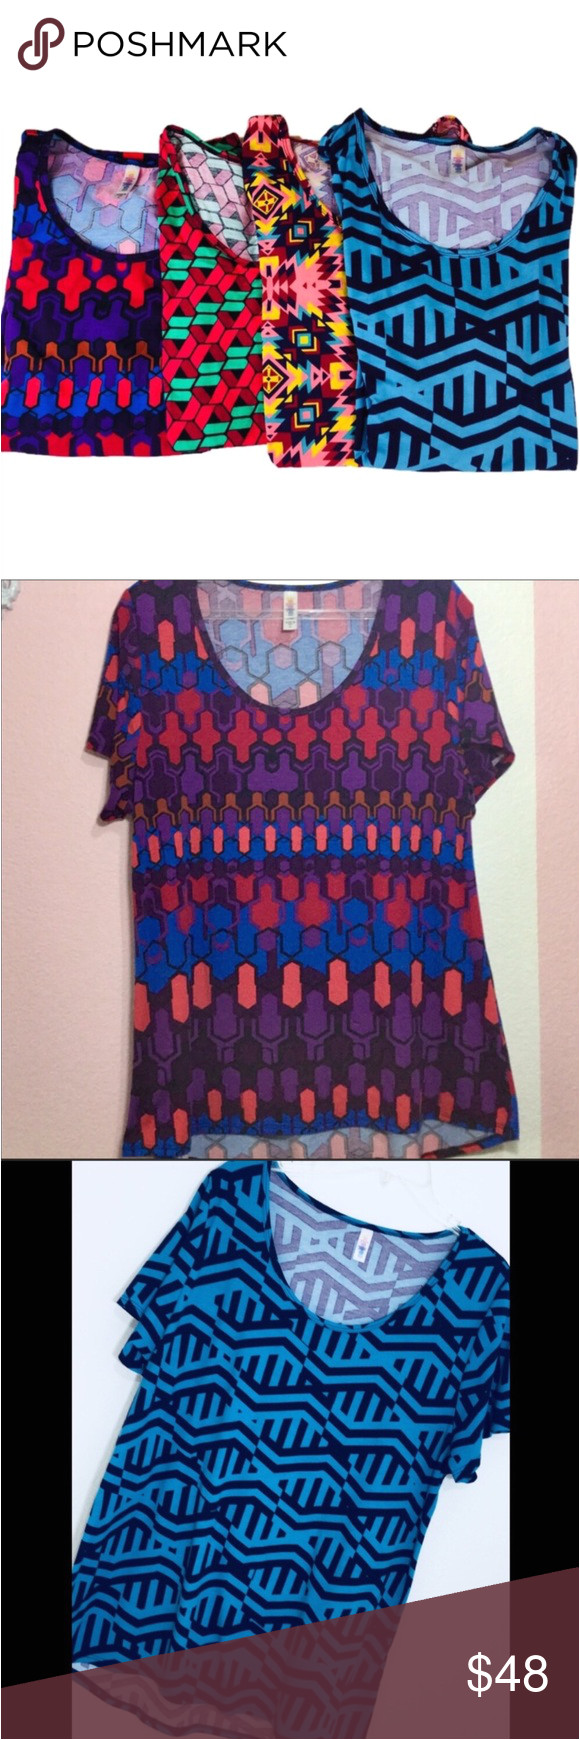 name your price lularoe classic tee bundle lularoe classic tee bundle cute prints the blue top does not have a size tag size xl euc lularoe tops blouses